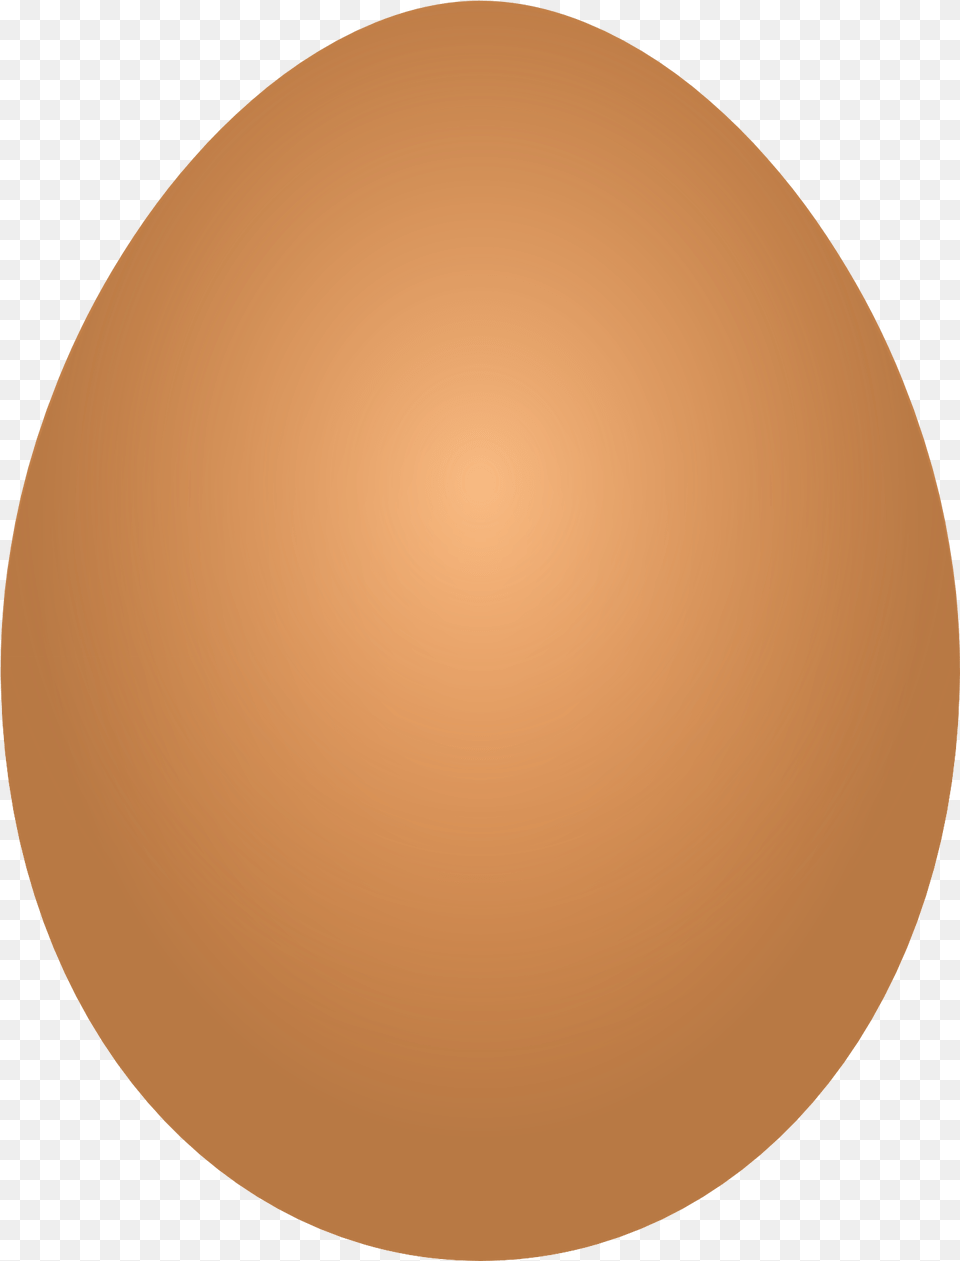 Egg, Food, Astronomy, Moon, Nature Png Image